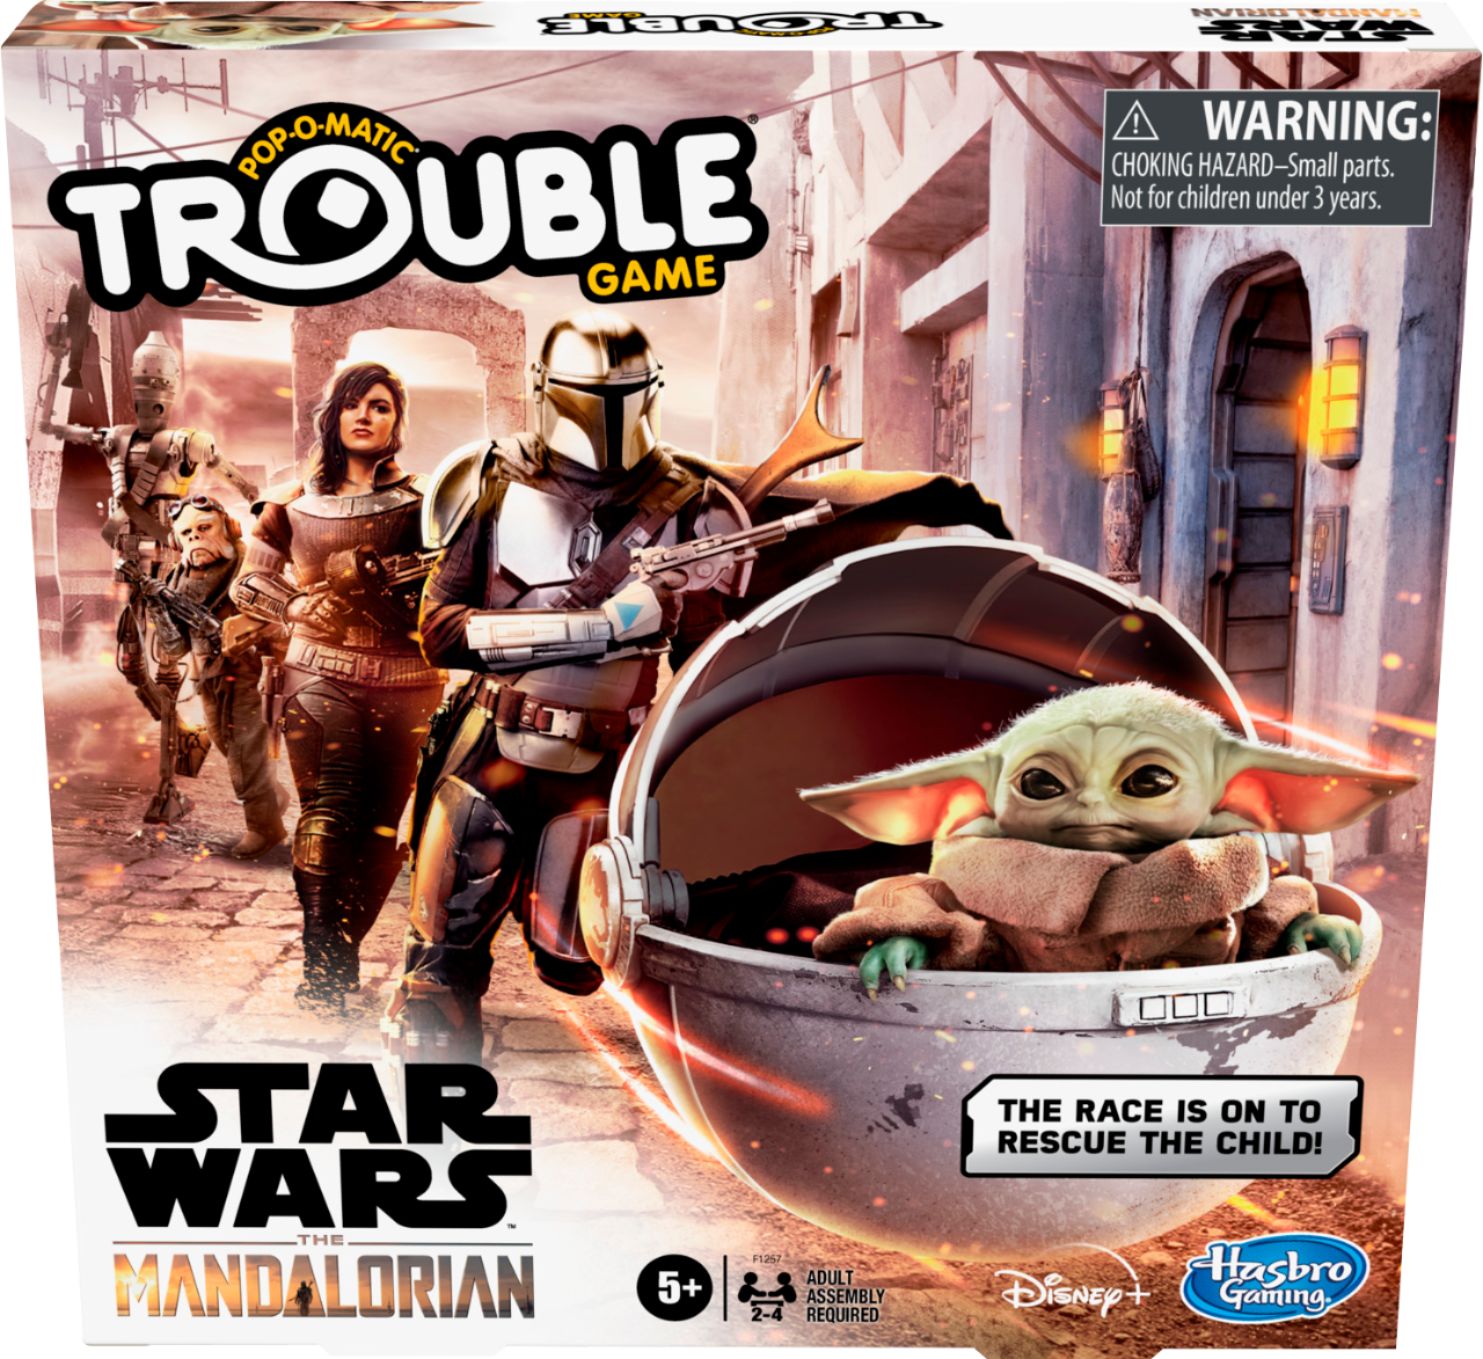 Details about   Hasbro Gaming Trouble Star Wars The Mandalorian Edition Board Game Ages 5+ 